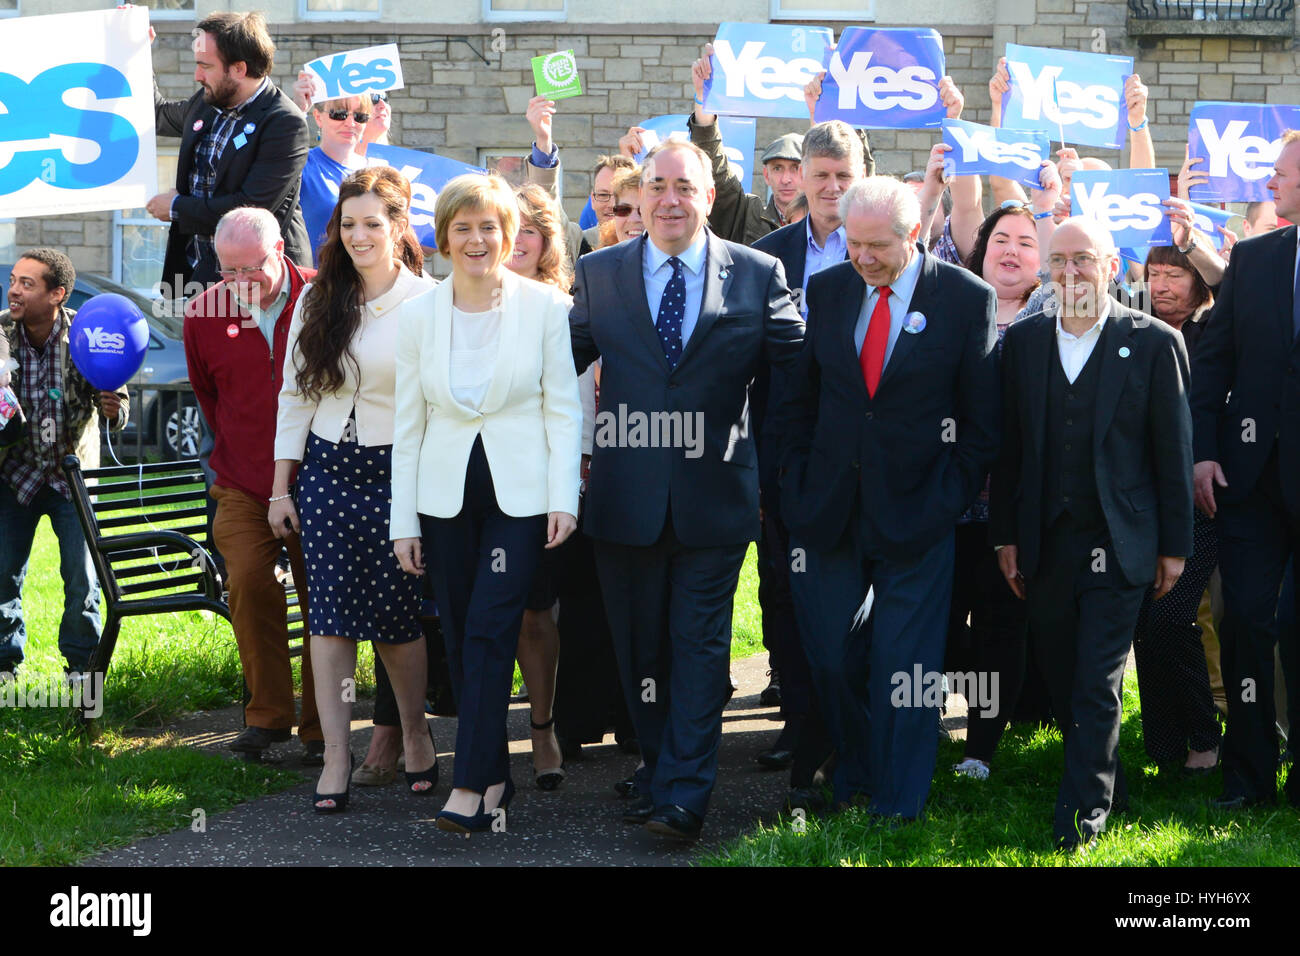 Alex Salmond and Nicola Sturgeon step out with Team Yes at an event in Edinburgh Stock Photo